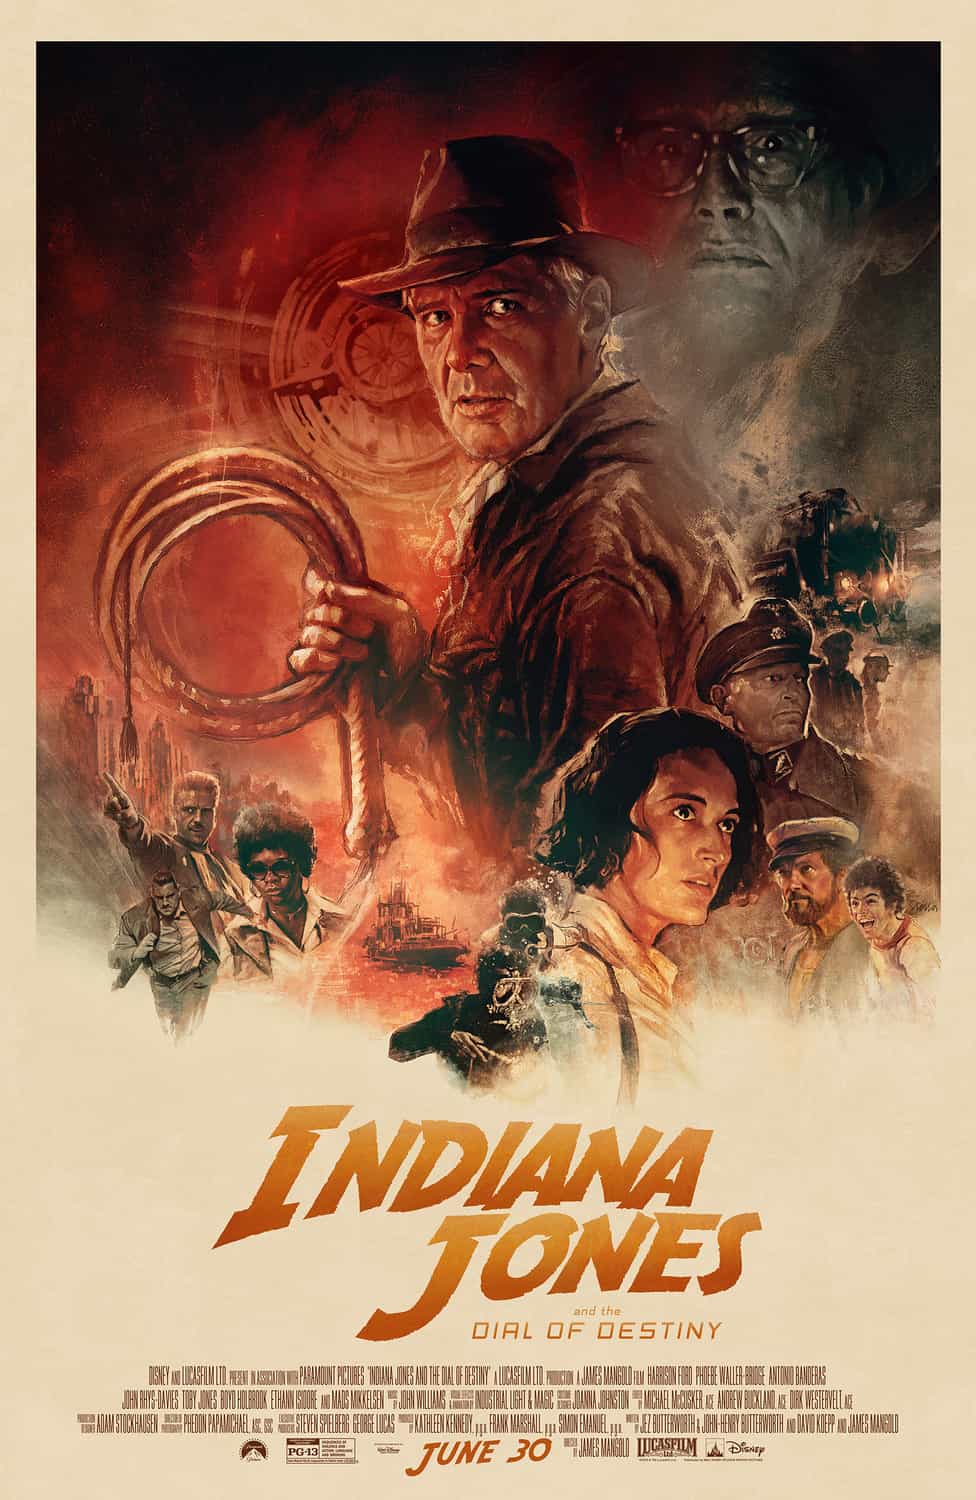 Global Box Office Weekend Report 30th June - 2nd July 2023:  Indiana Jones is the top movie across the globe with a $130 Million debut